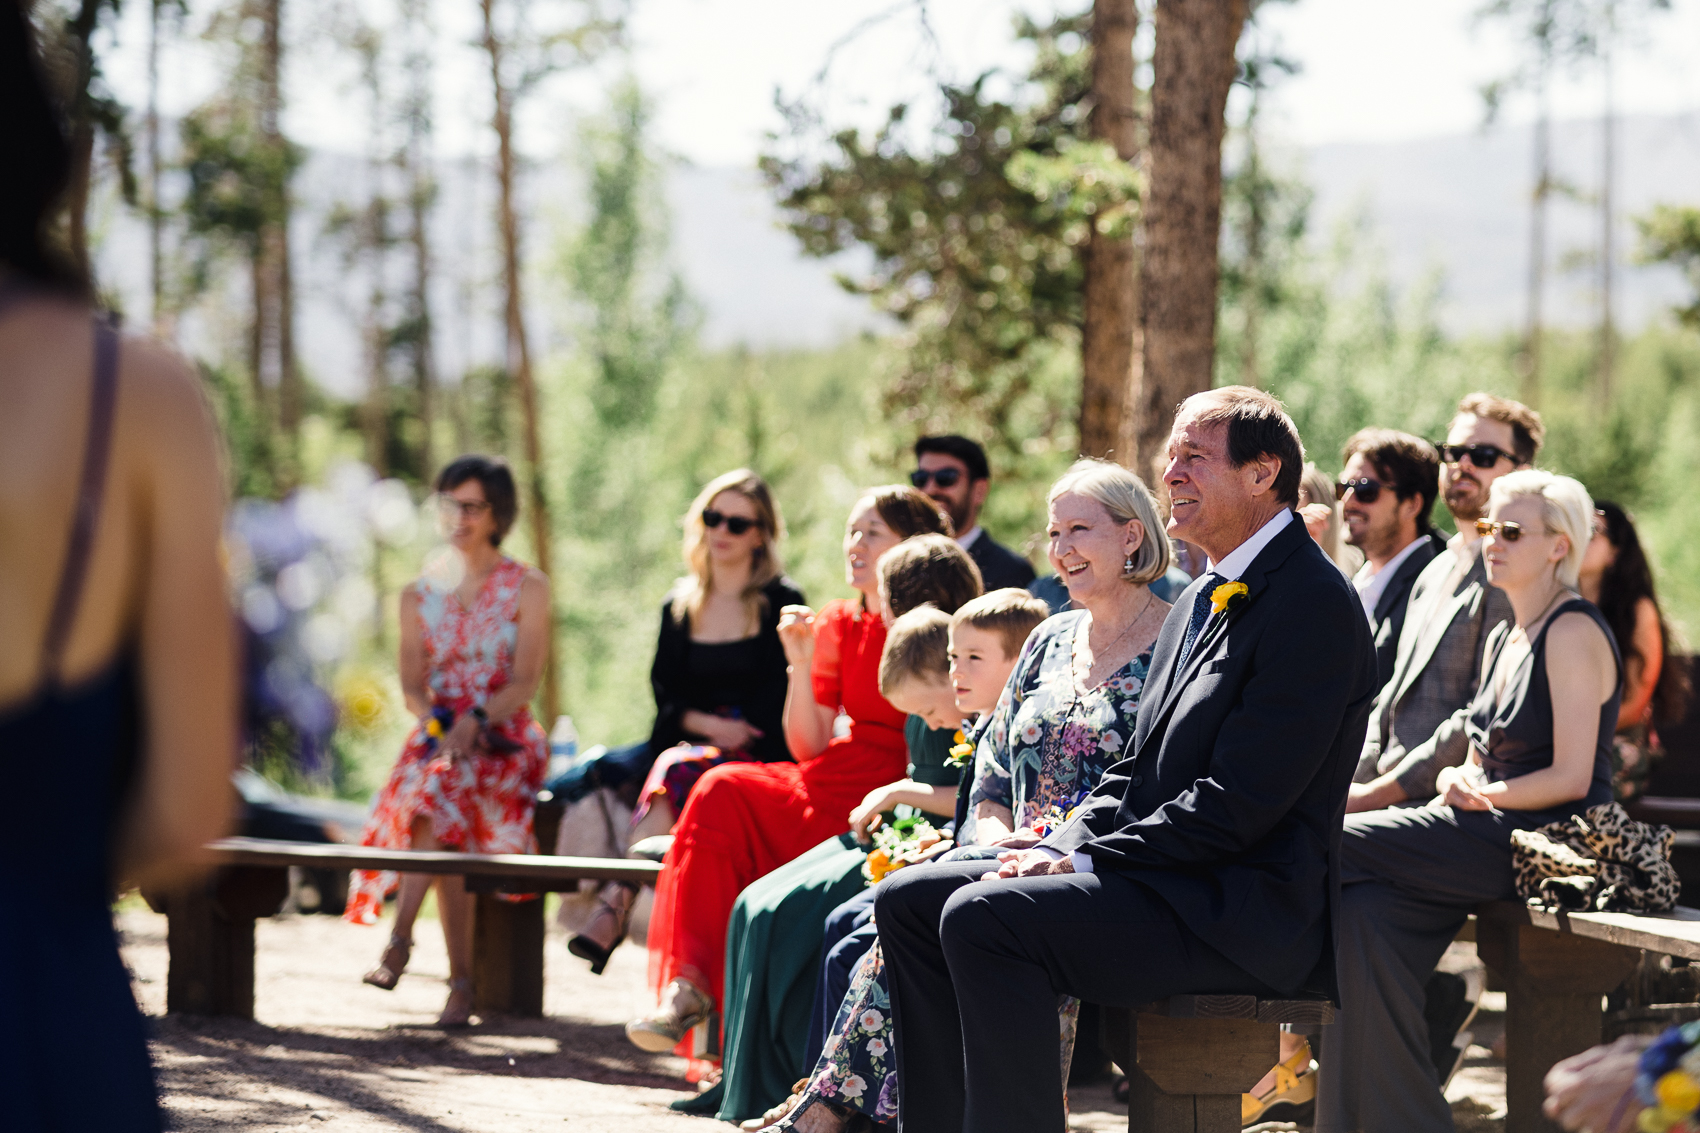 An outdoor wedding ceremony in front of a stunning mountain backdrop at their Grand Lake Lodge wedding.